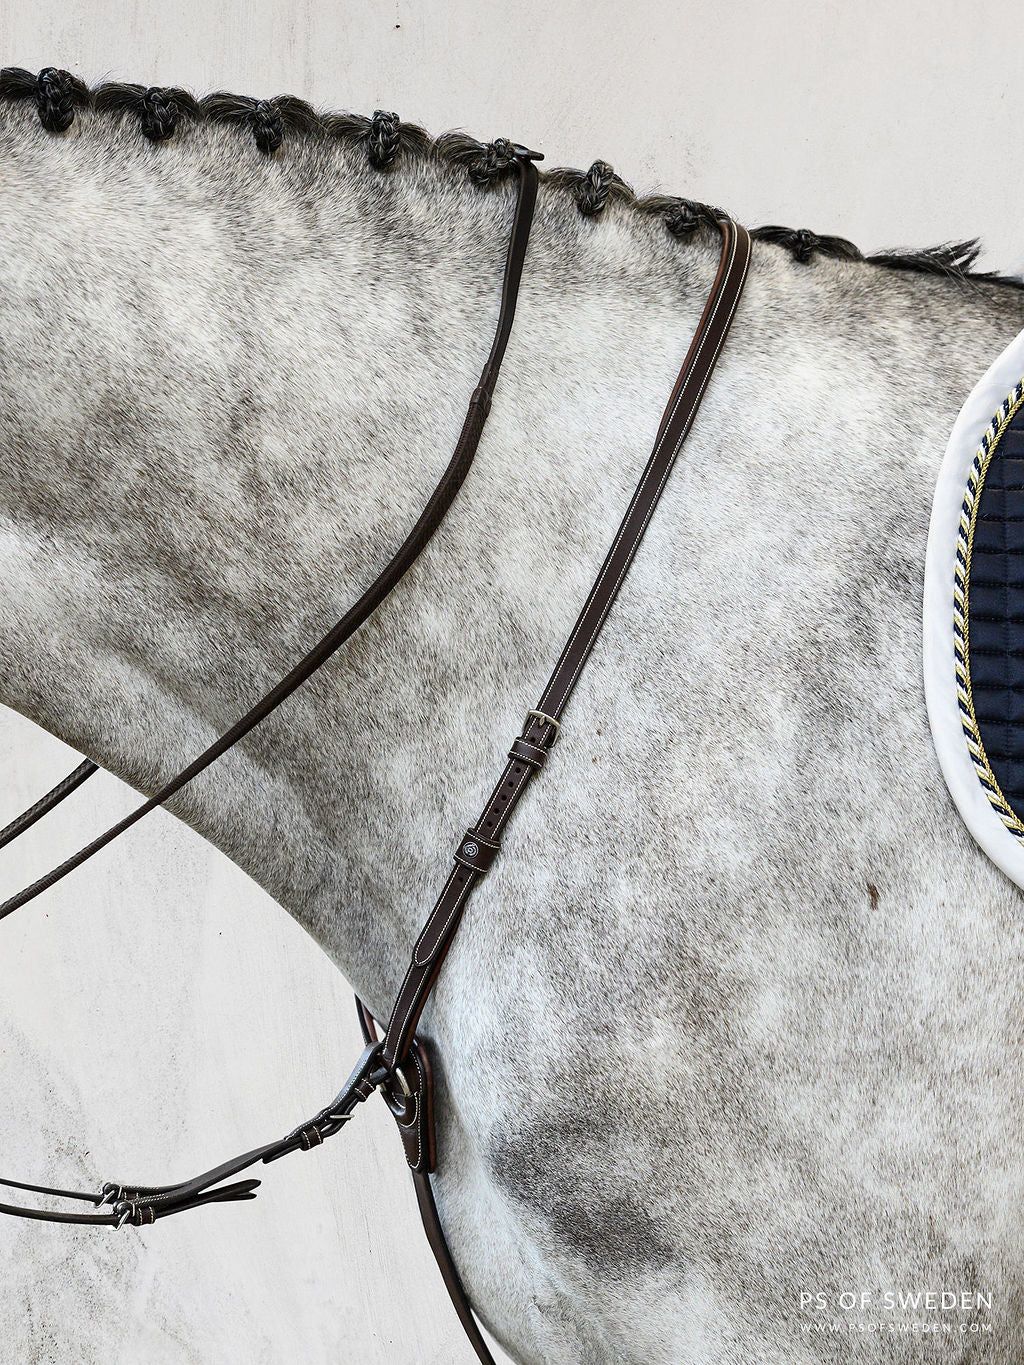 A classic martingale, extra padded along the withers for additional comfort. A convenient hook attaches to the girth and the martingale is adjustable on both sides of the neck.